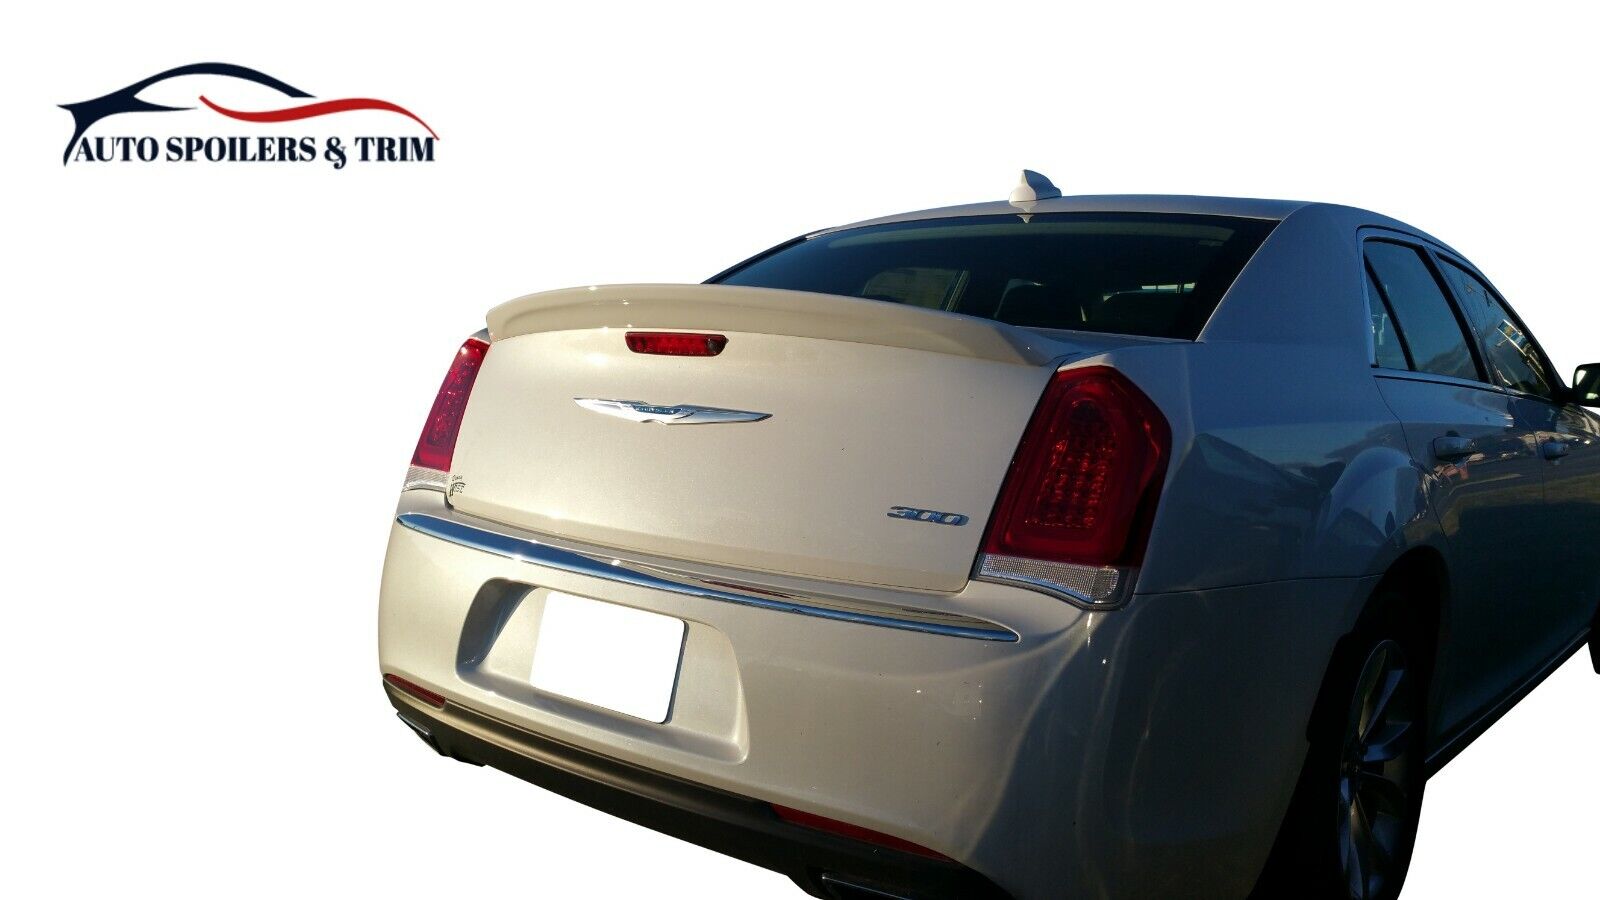 #563 PAINTED FACTORY STYLE SRT SPOILER Fits the 2012 - 2020 CHRYSLER 300